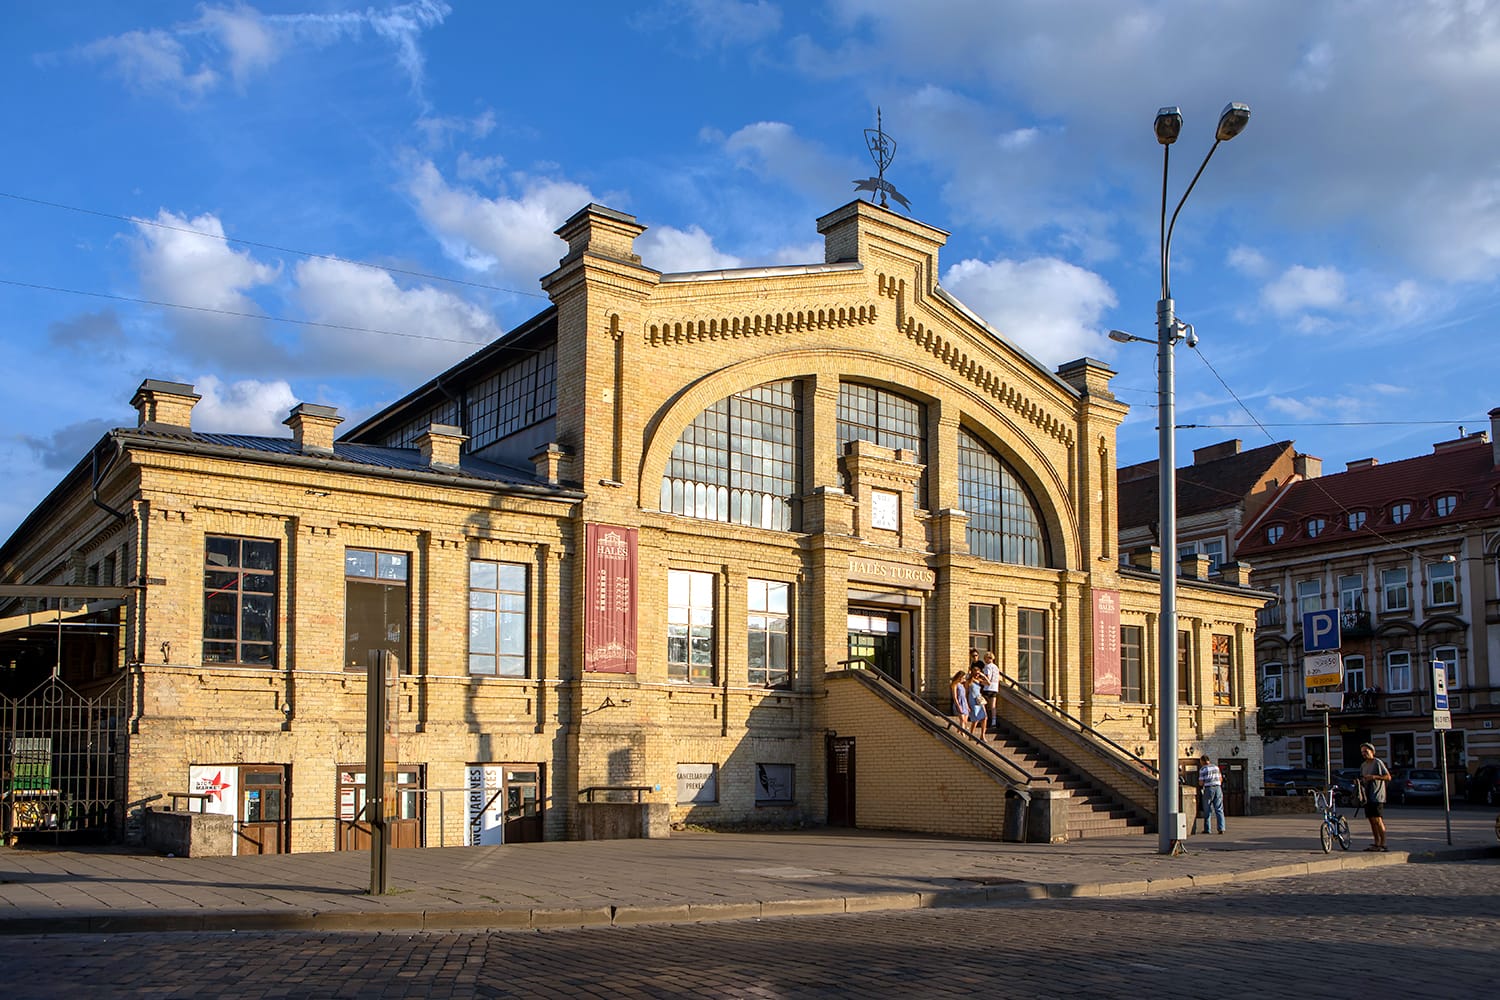 Hales market, one of the largest and oldest markets in Vilnius, Lithuania